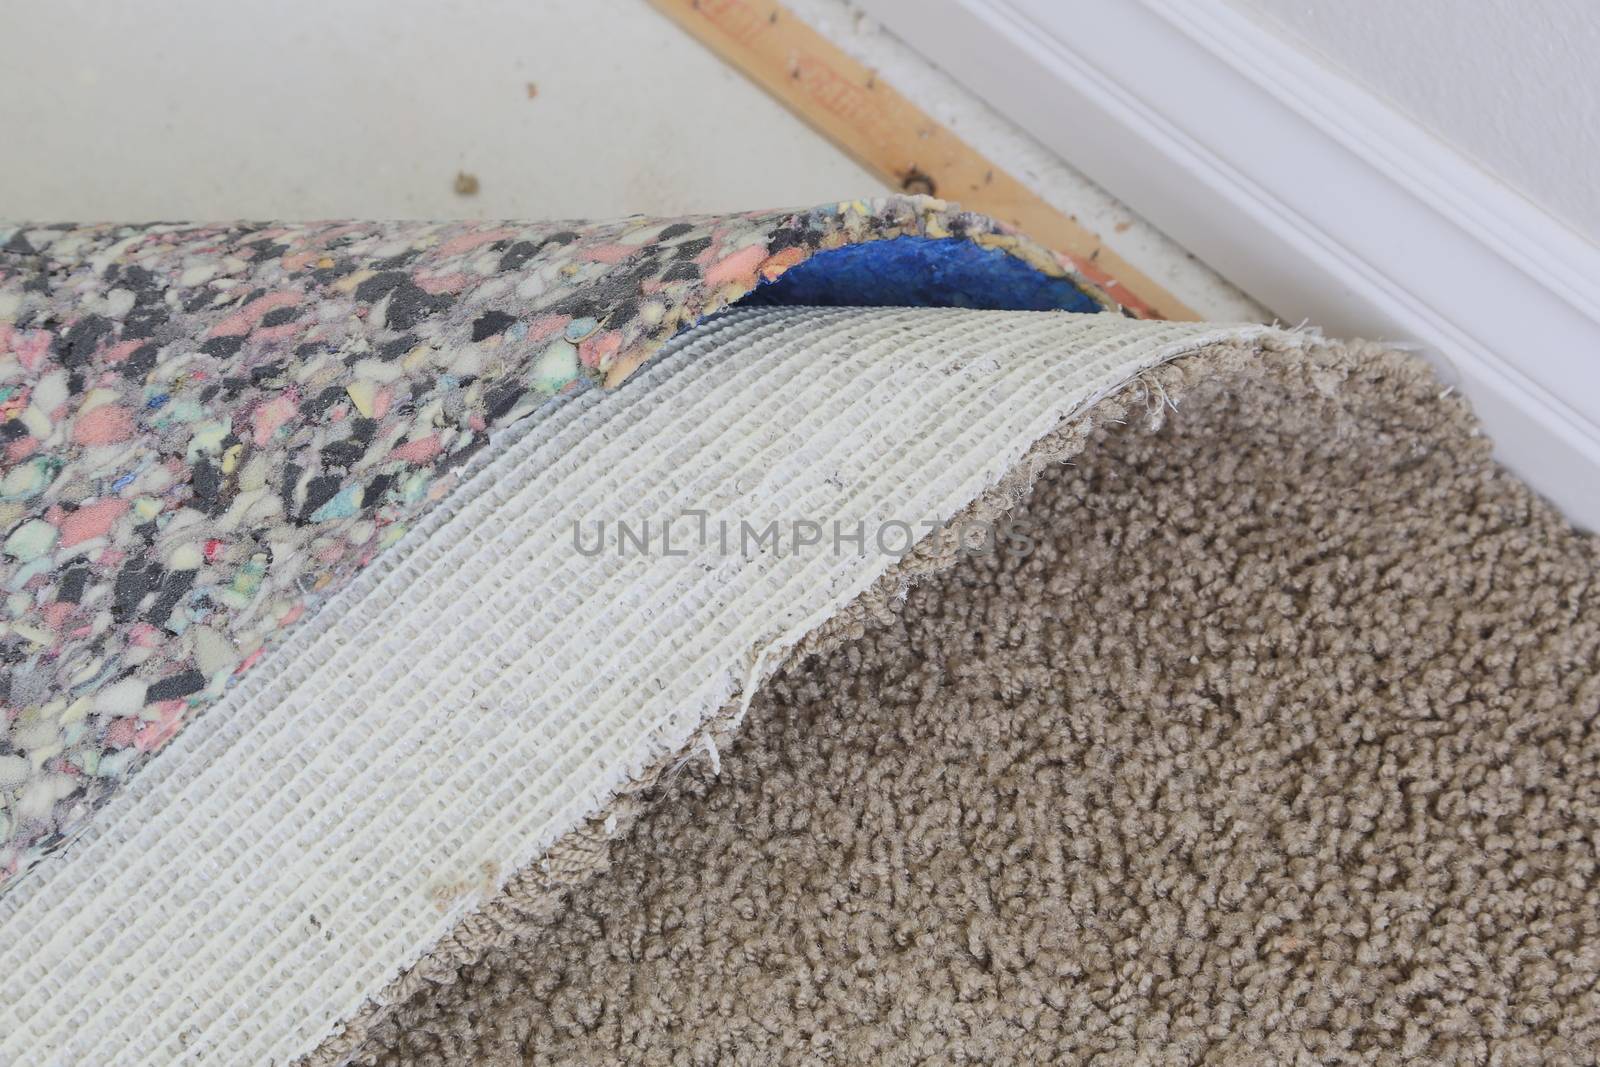 Pulled Back Carpet and Padding In Room of House. by Feverpitched